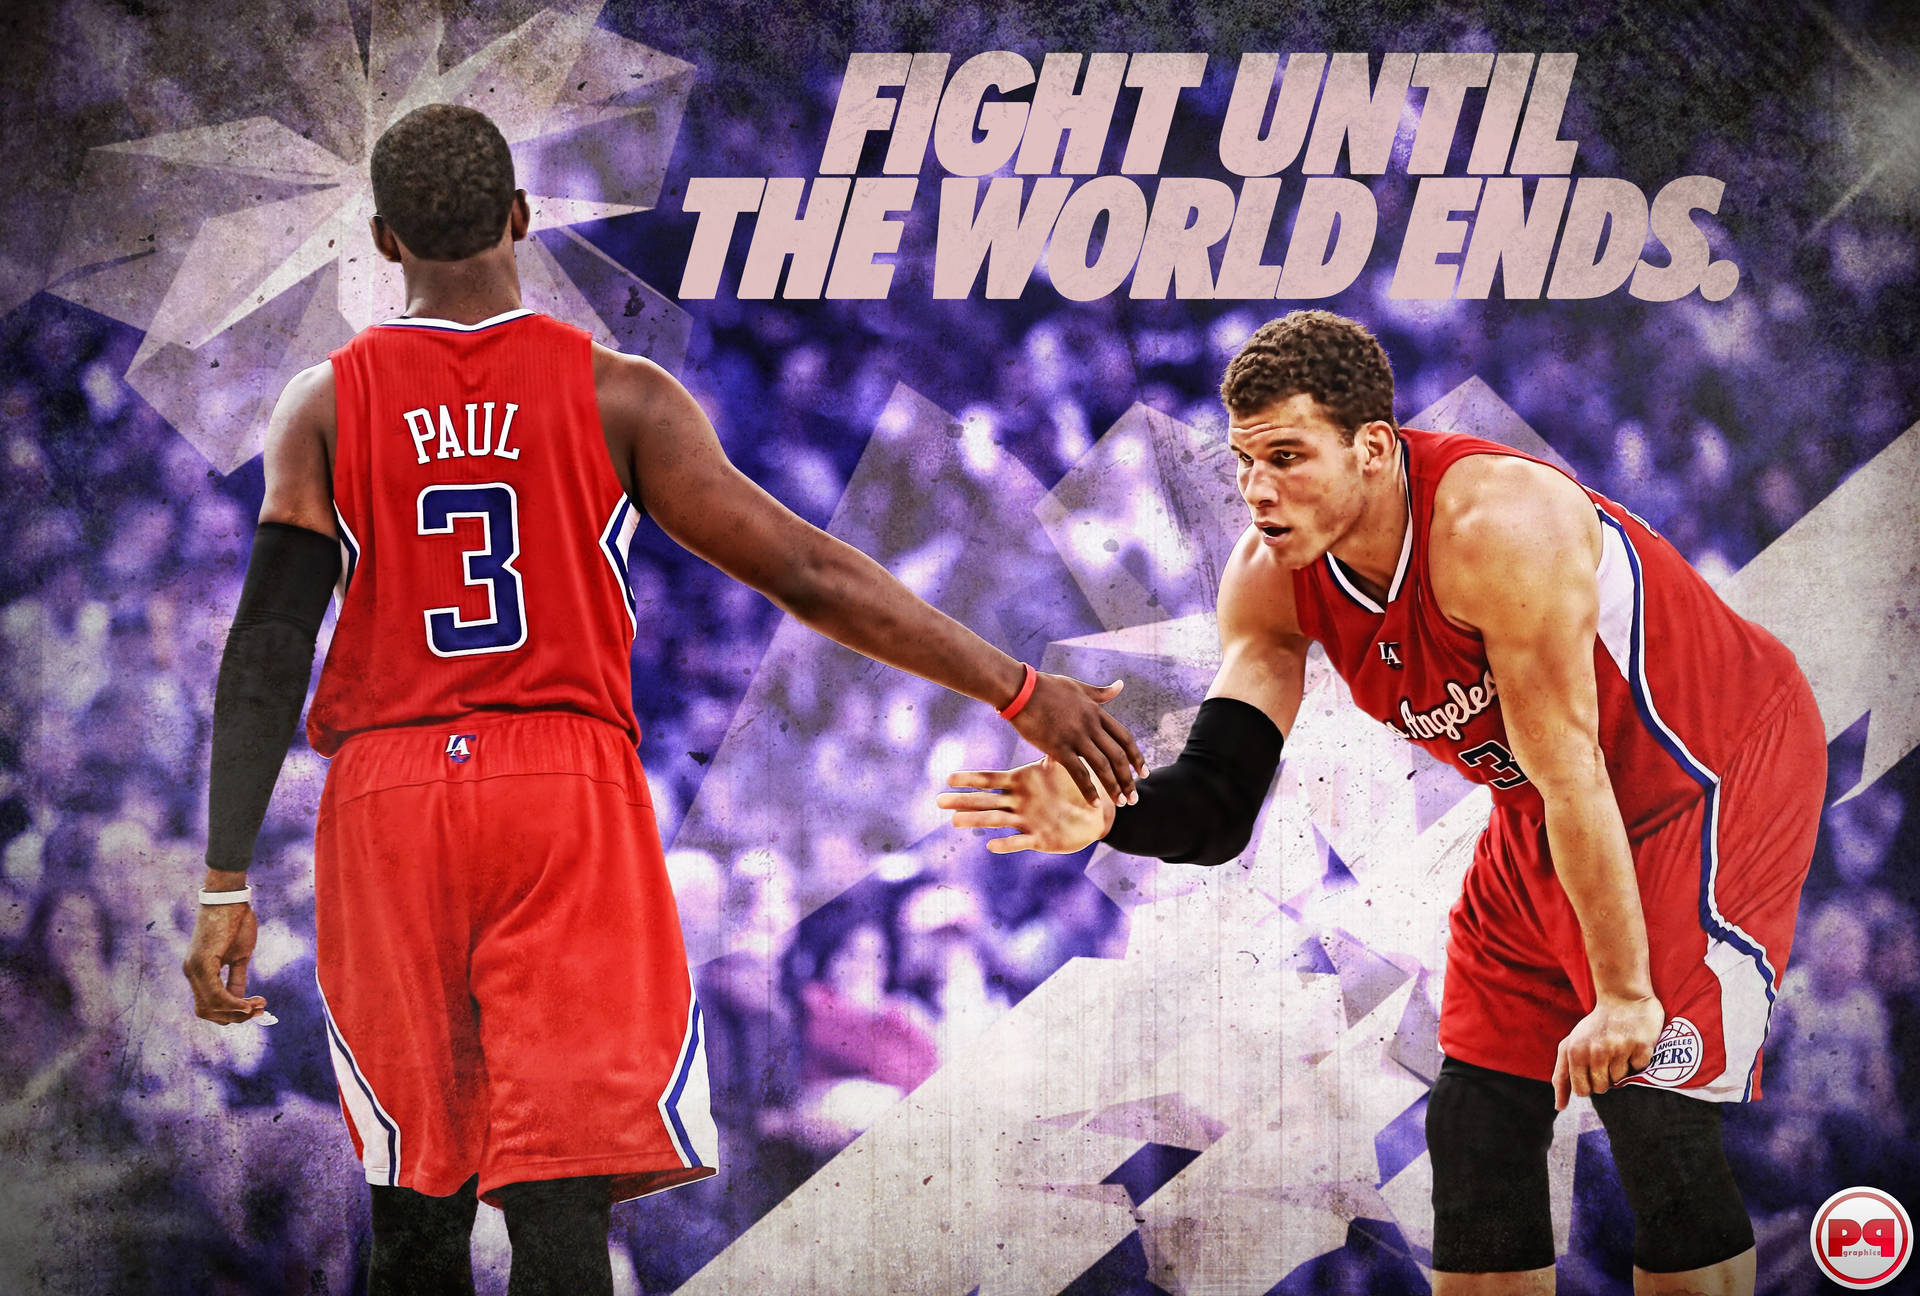 chris paul and blake griffin wallpaper